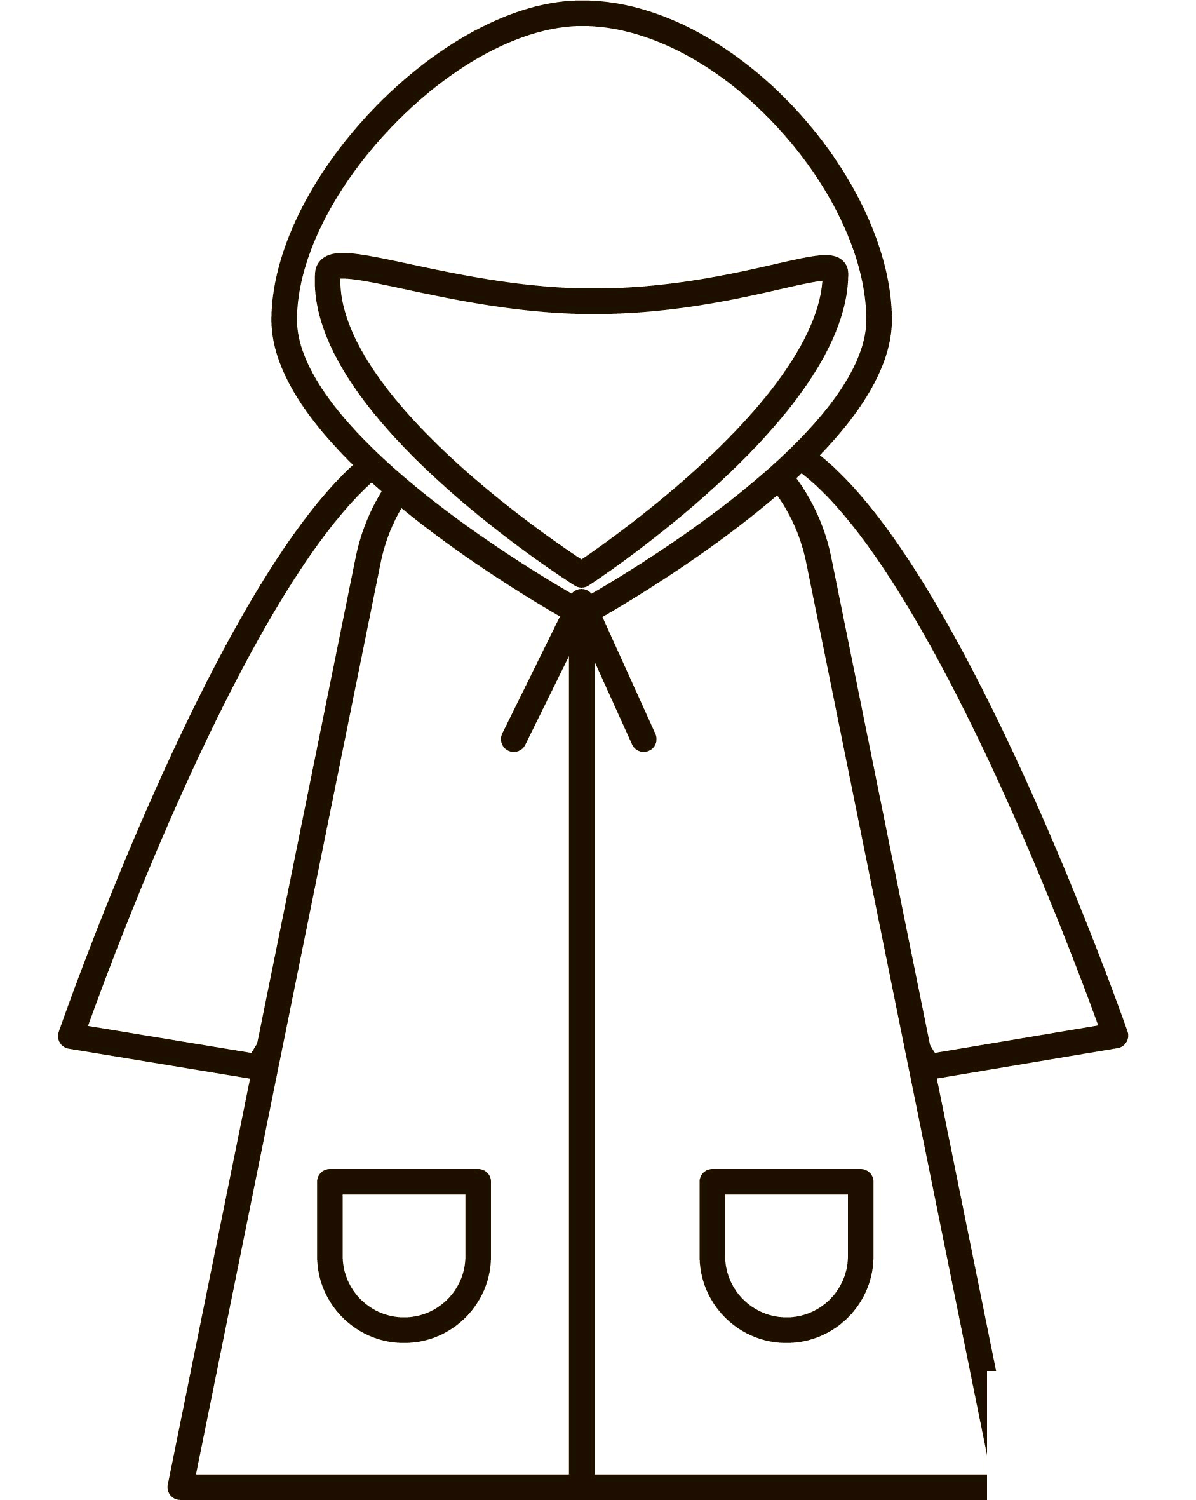 Raincoat coloring page - ColouringPages